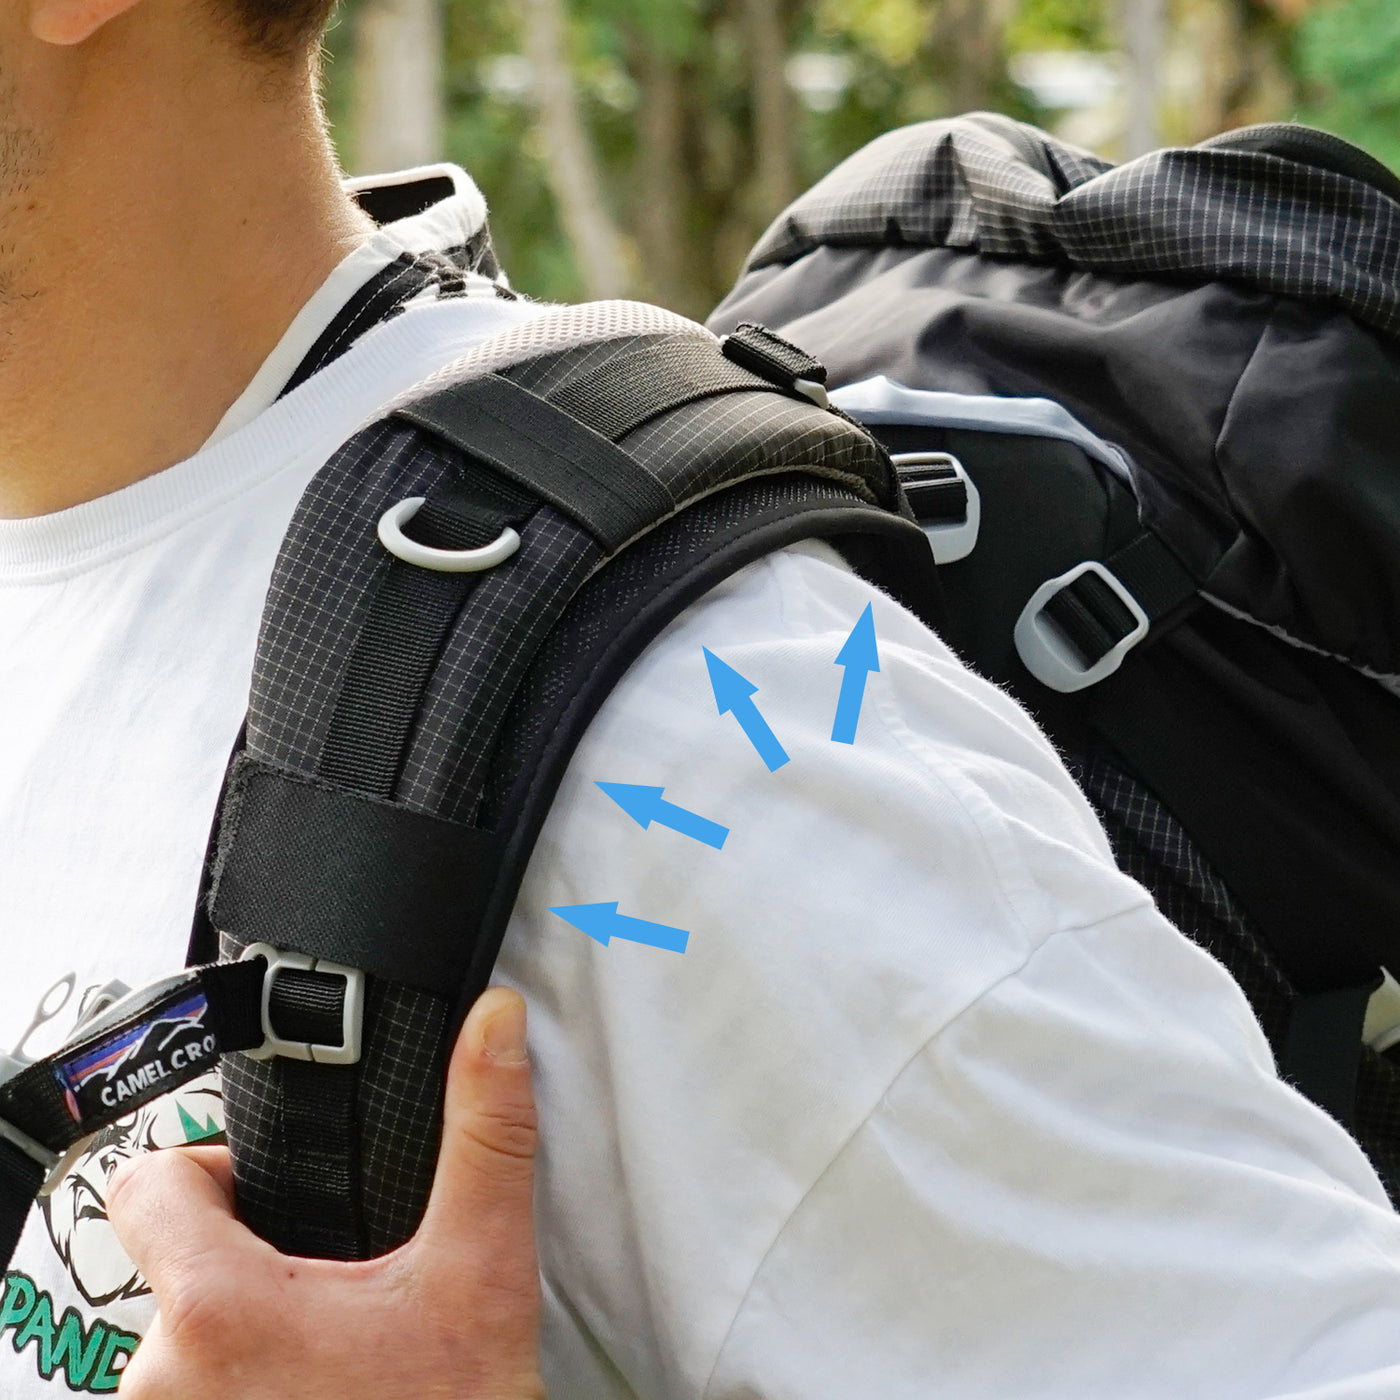 AirStrap: Your Instant Weight-Reducing Bag Shoulder Straps